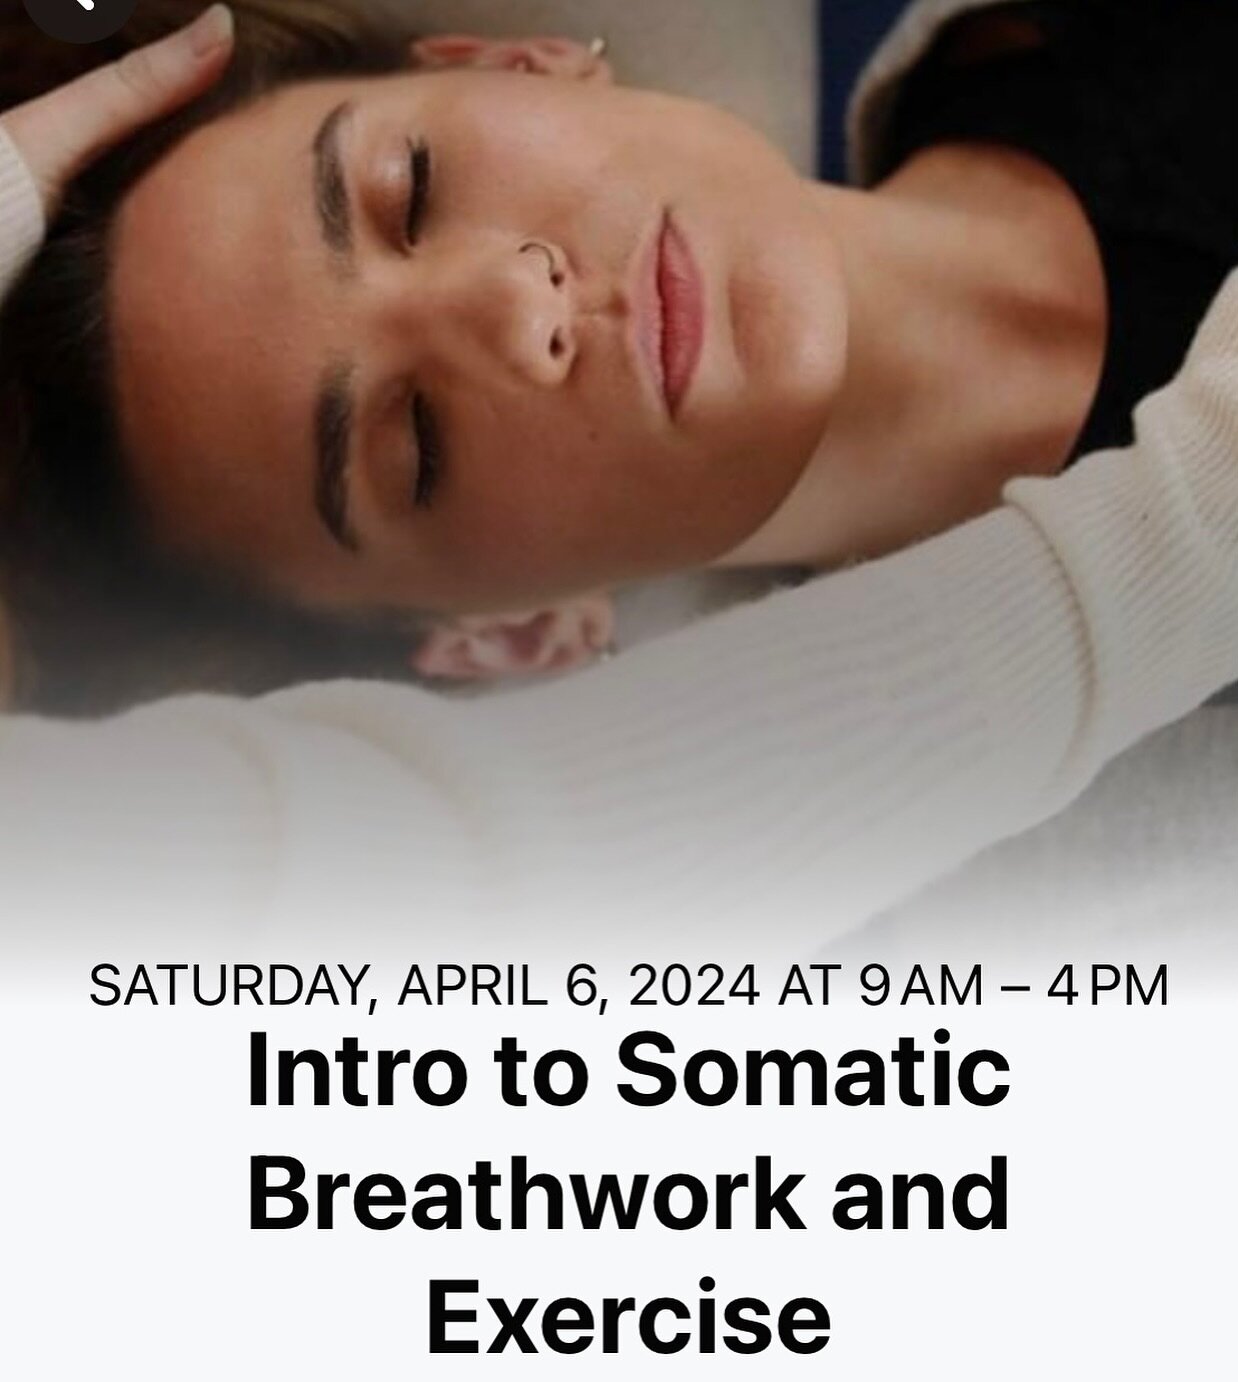 If you are in or near Meadow Lake SK Canada, come on out to this transformative workshop. Jessica Bishop will be leading us through our emotions with Somatic Beathwork. Message me to register.